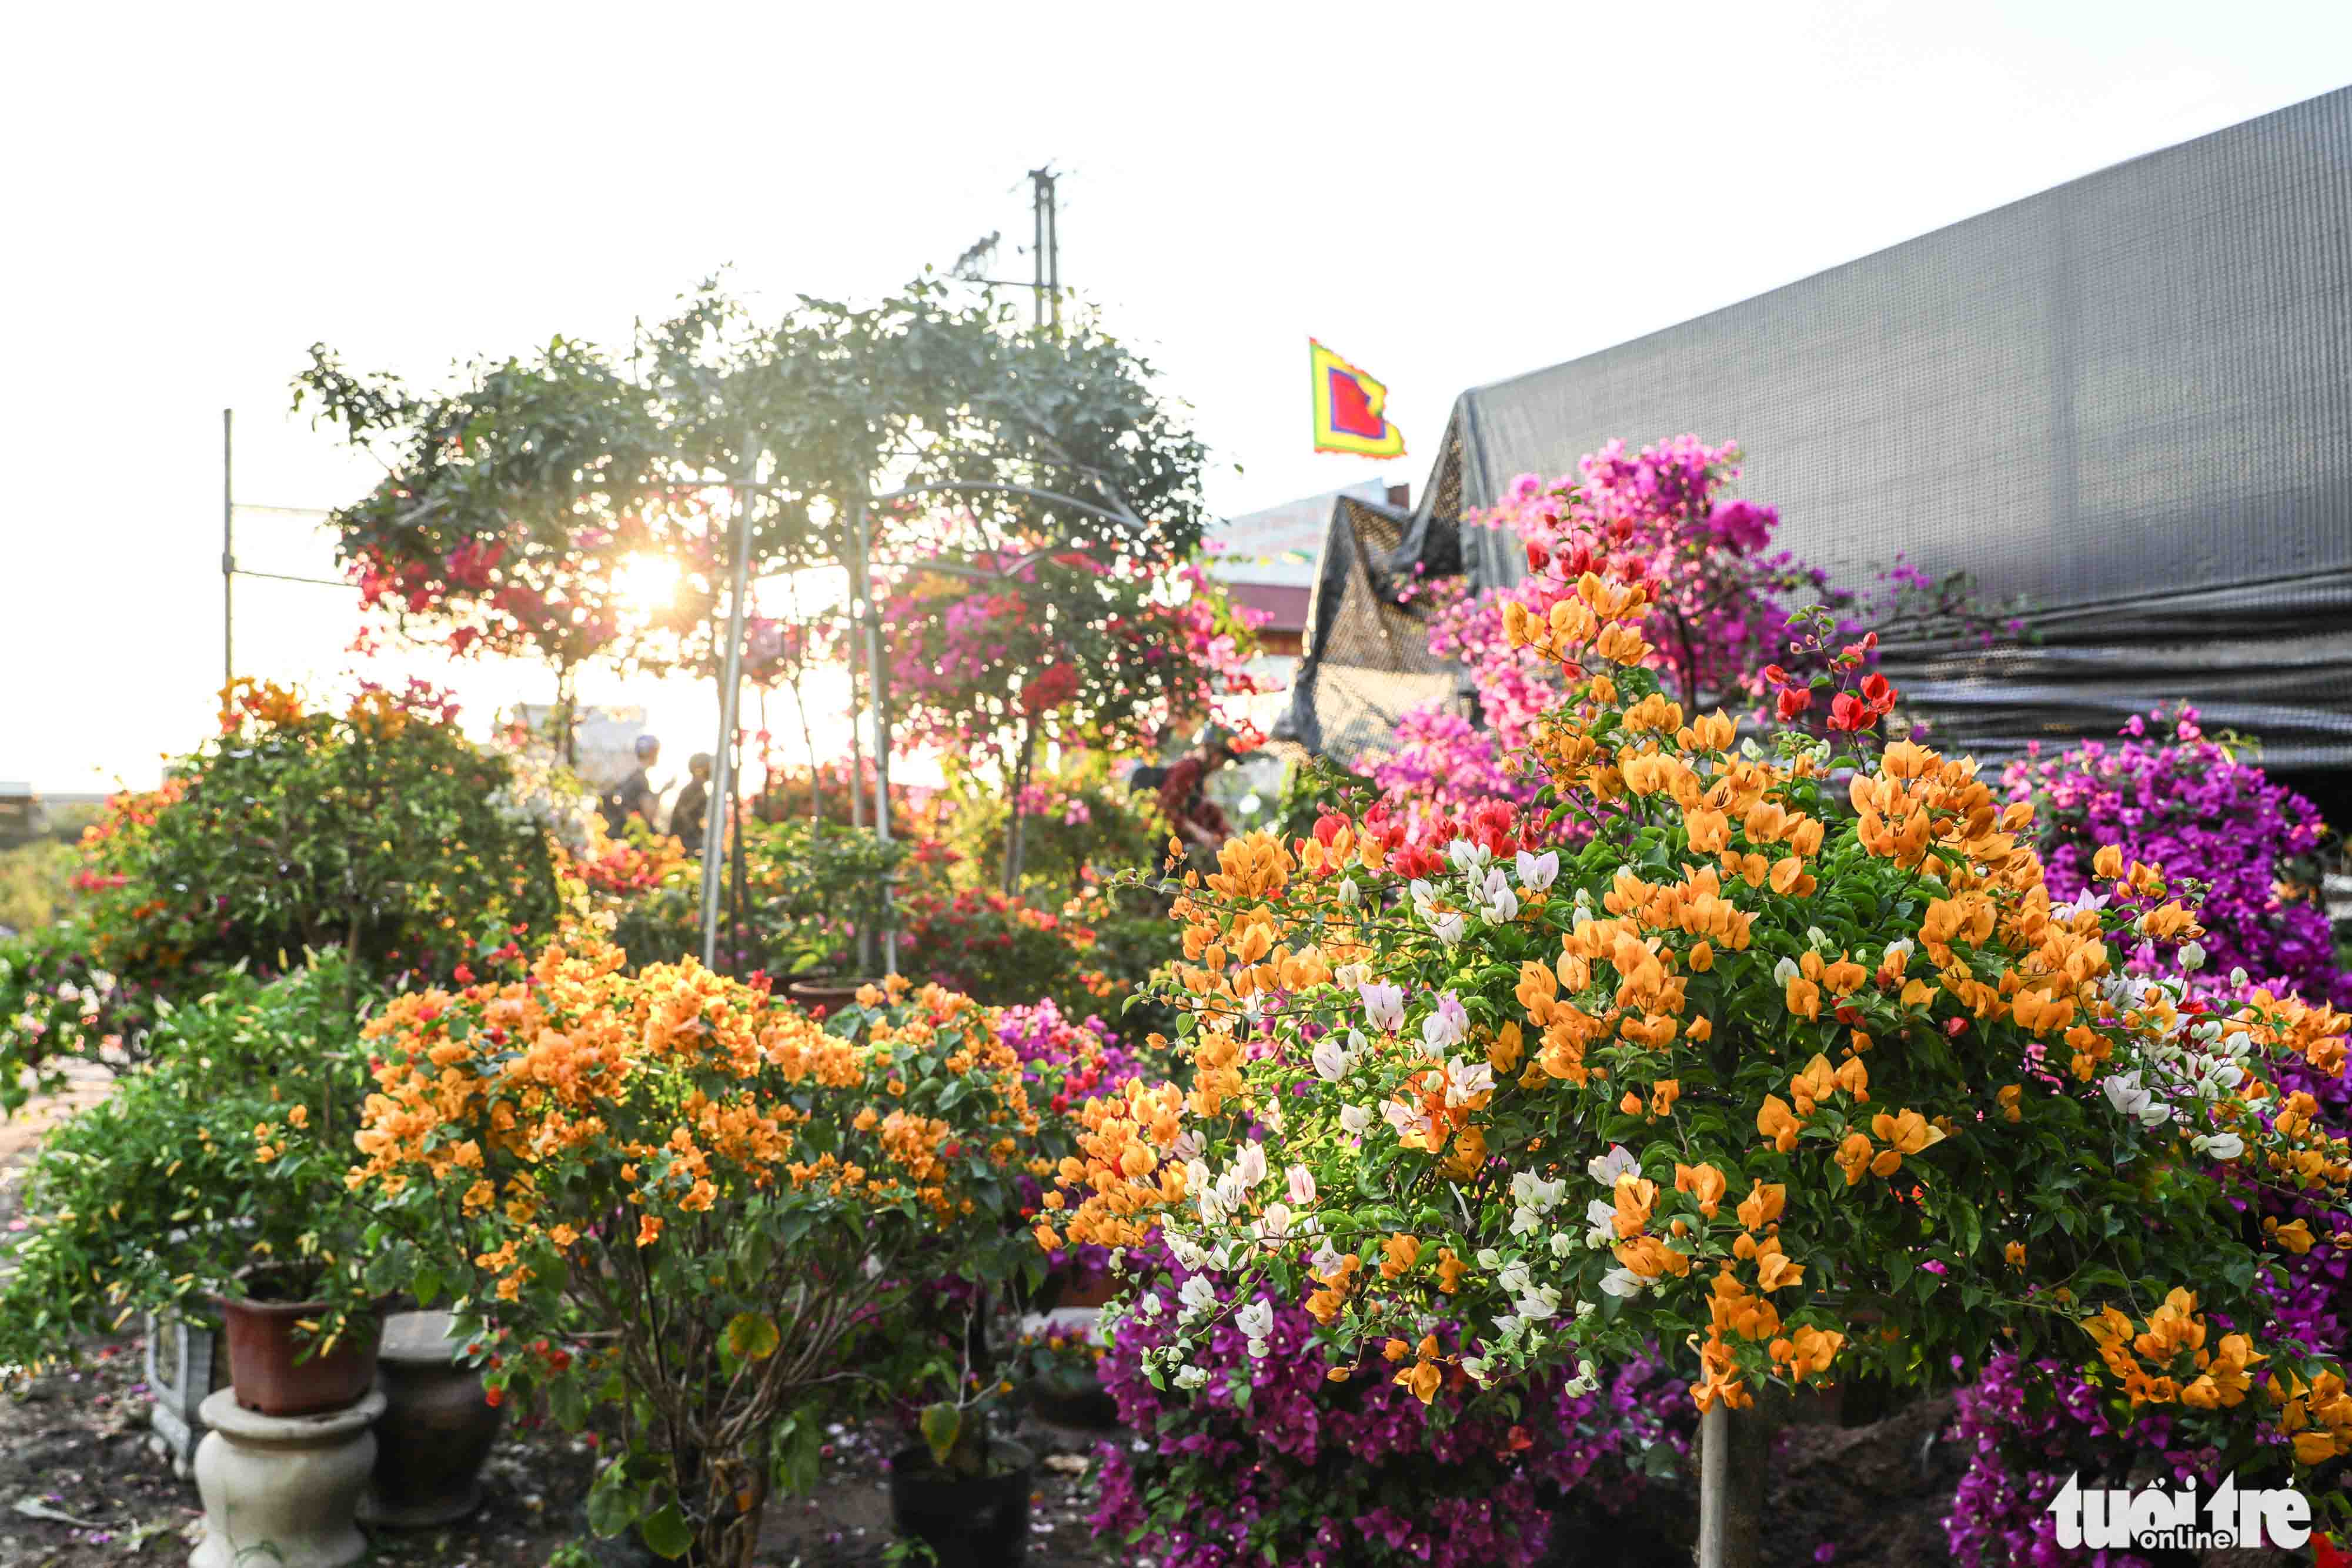 Bougainvillea are grown at Me Linh flower village in Me Linh District, Hanoi. Photo: Danh Khang / Tuoi Tre